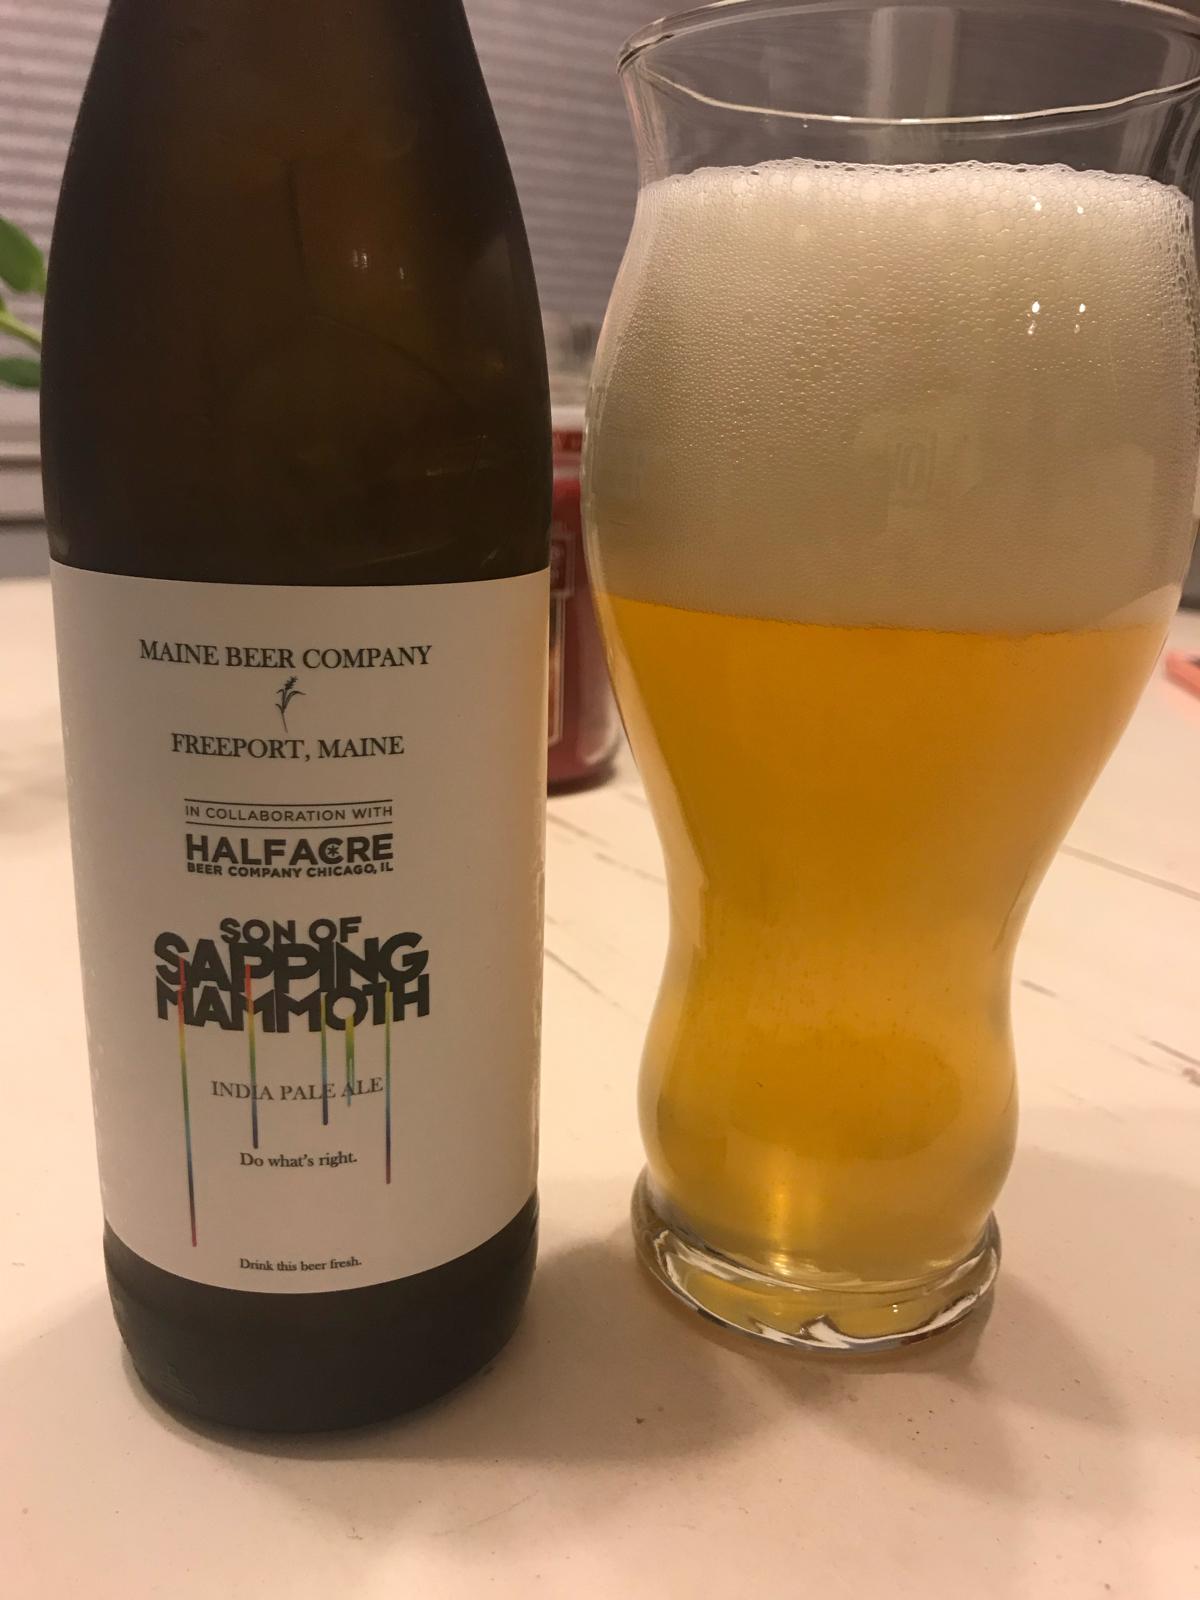 Son of Sapping Mammoth (Collaboration with Half Acre)